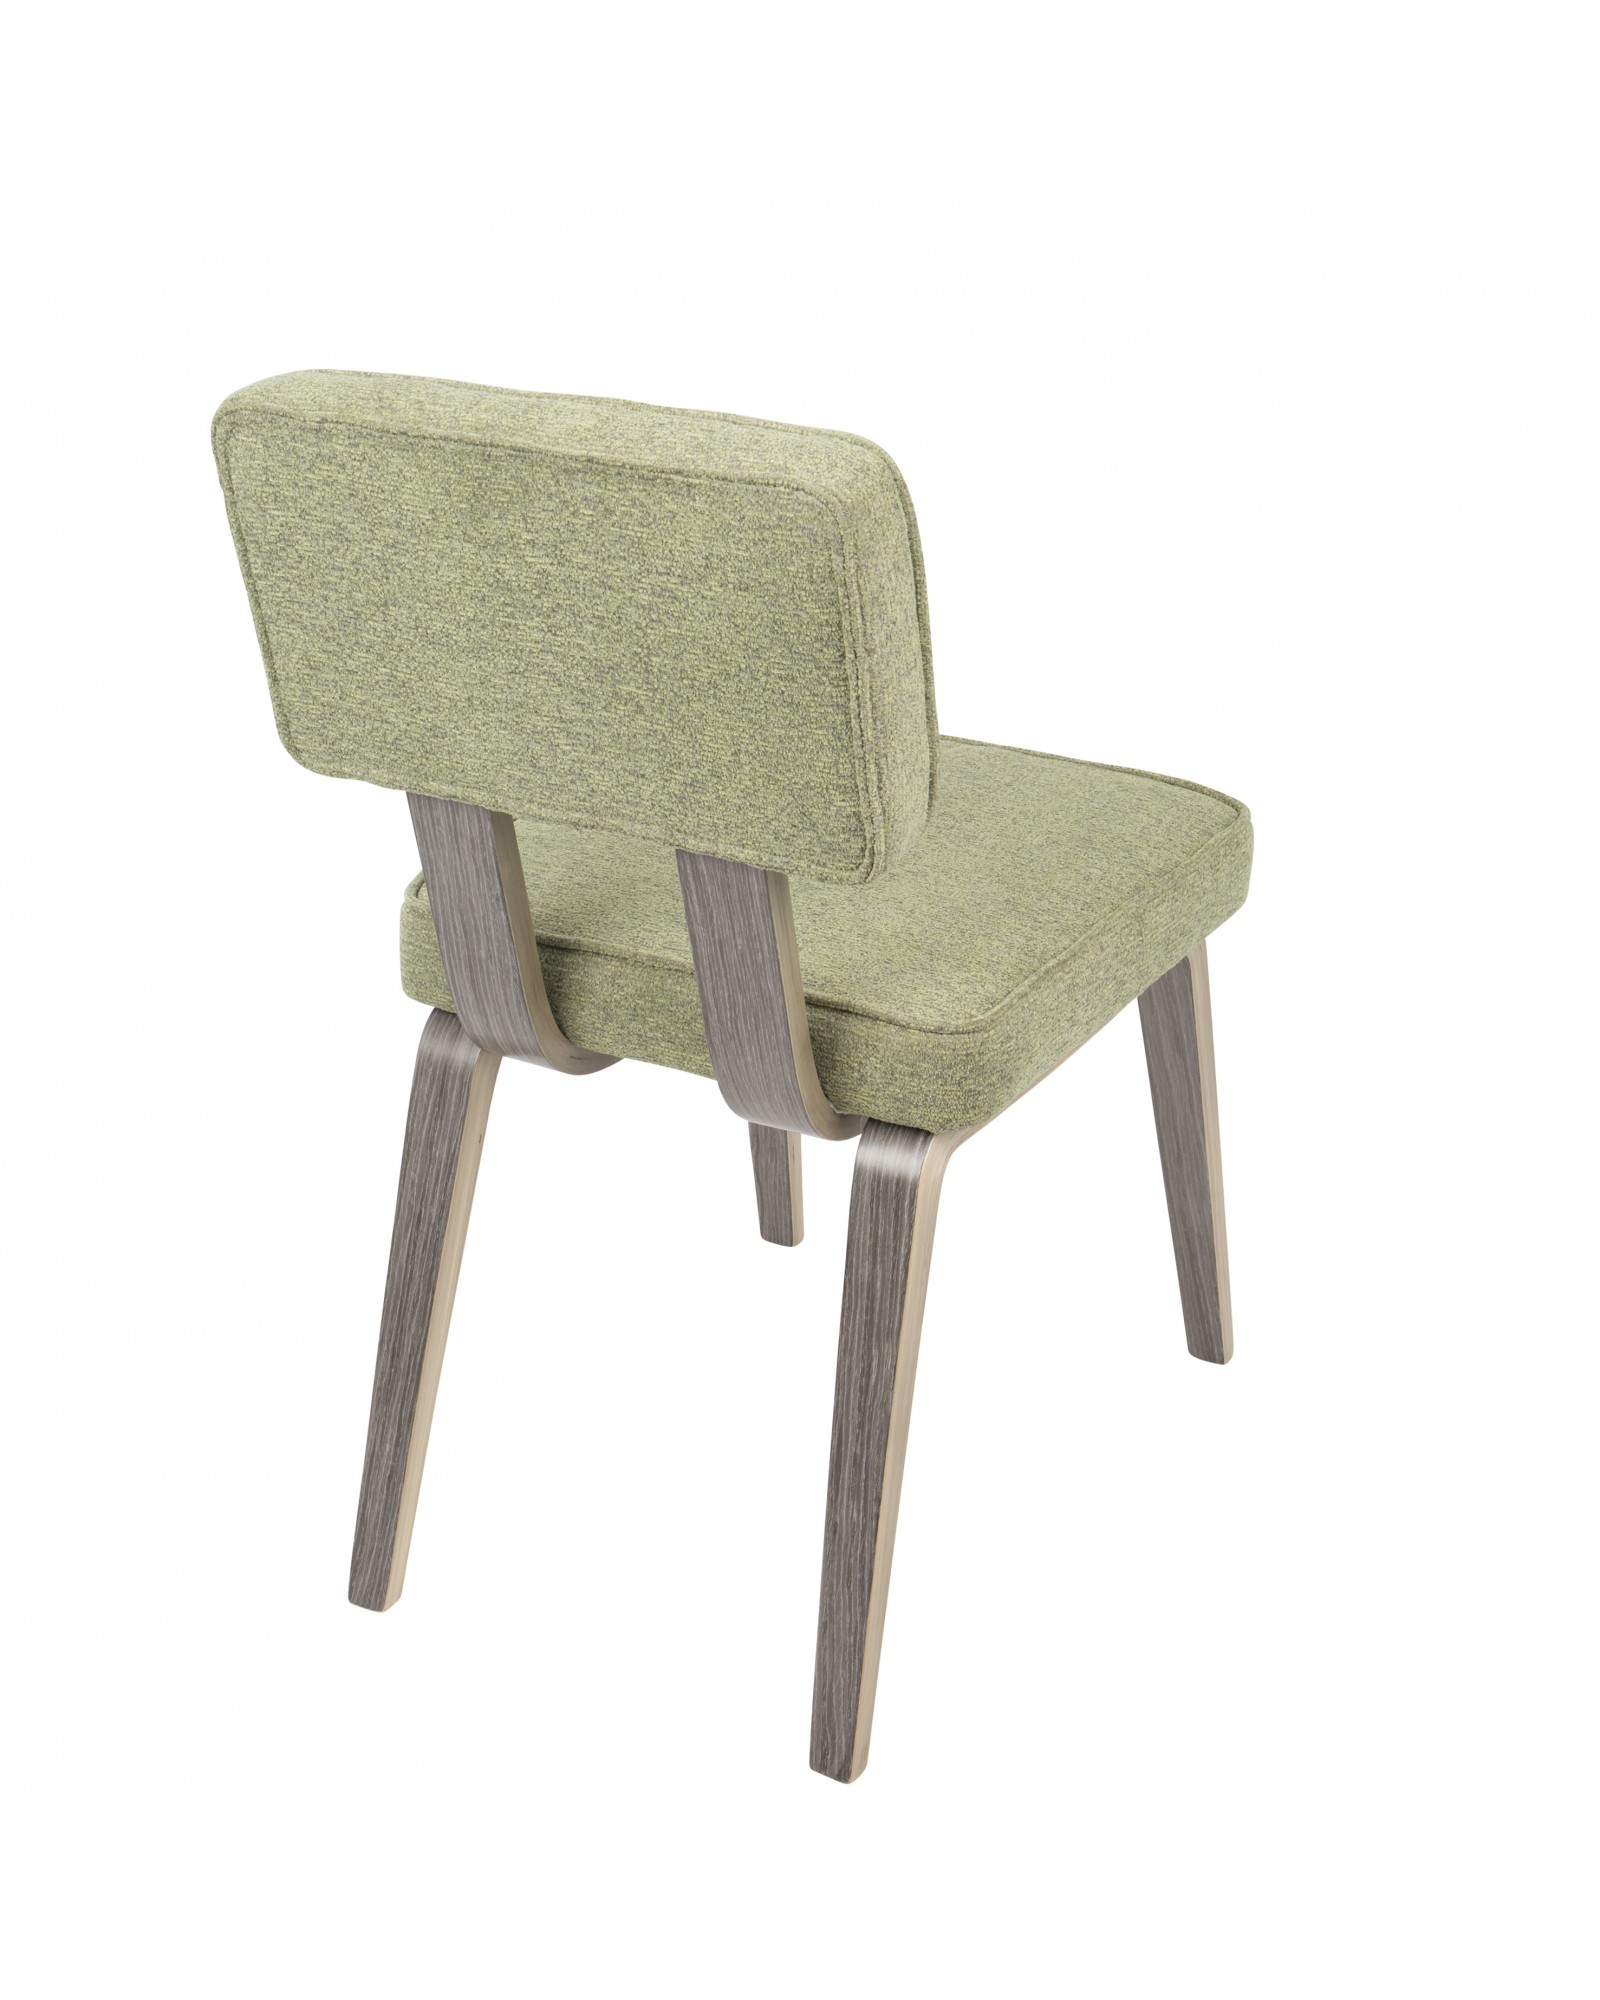 Nunzio Mid-Century Modern Dining Chair in Light Grey Wood and Light Green Fabric - Set of 2